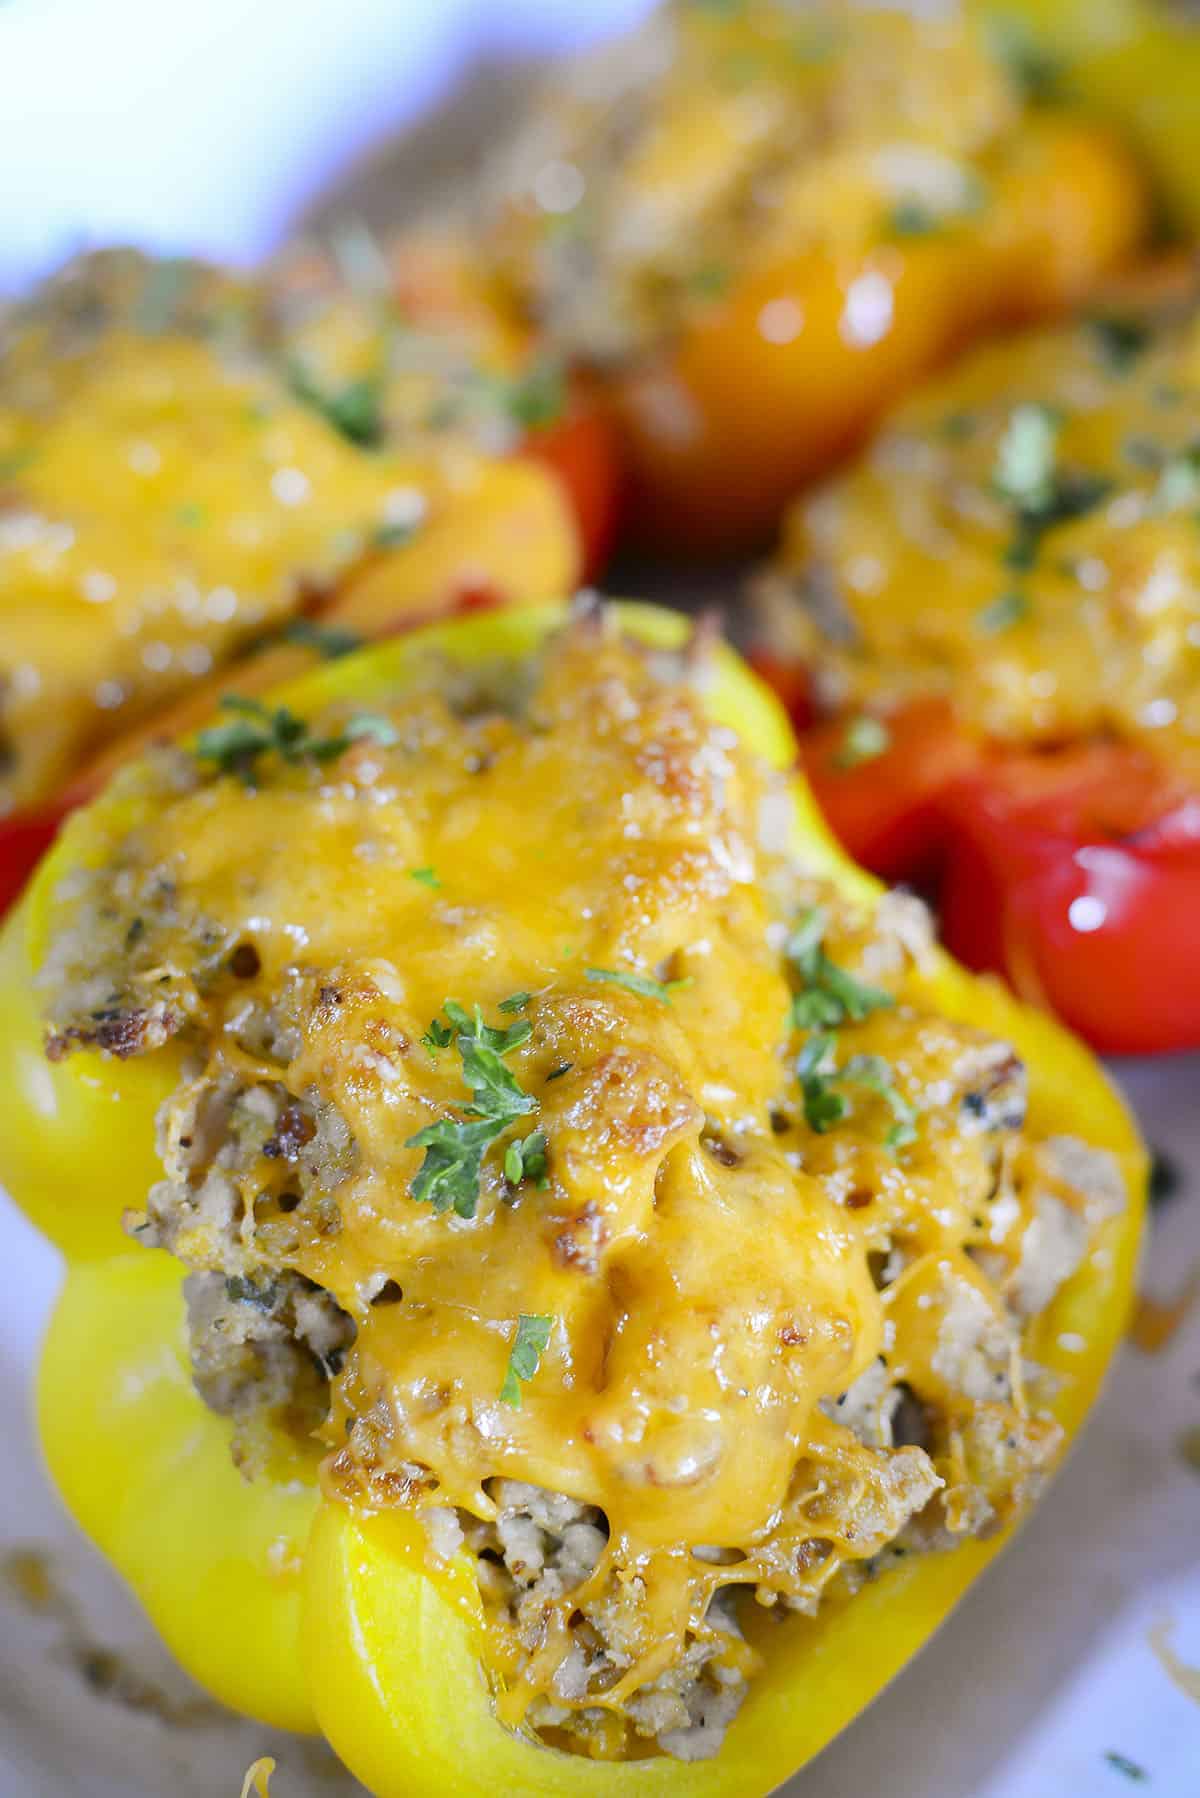 A yellow bell peppers stuffed with chicken and topped with cheese.